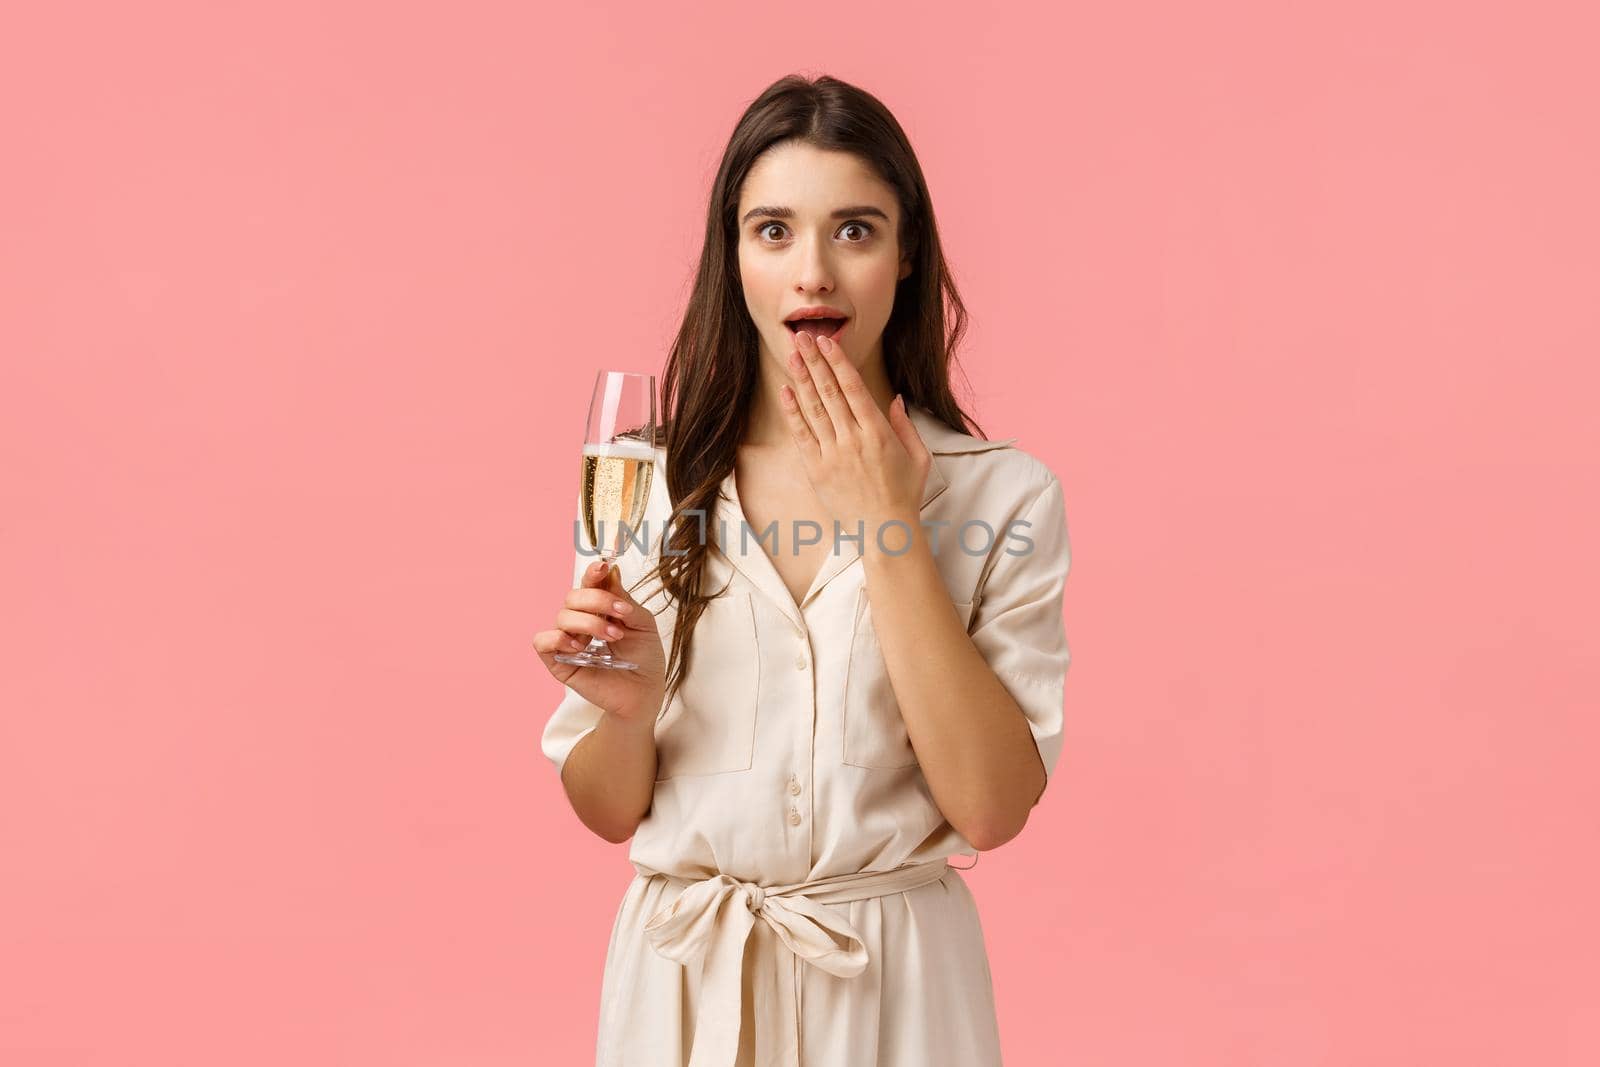 Girl gossiping on party with girlfriends. Attractive amused and surprised young lady in dress, holding champagne glass, open mouth wondered cover with hand and staring camera astonished.